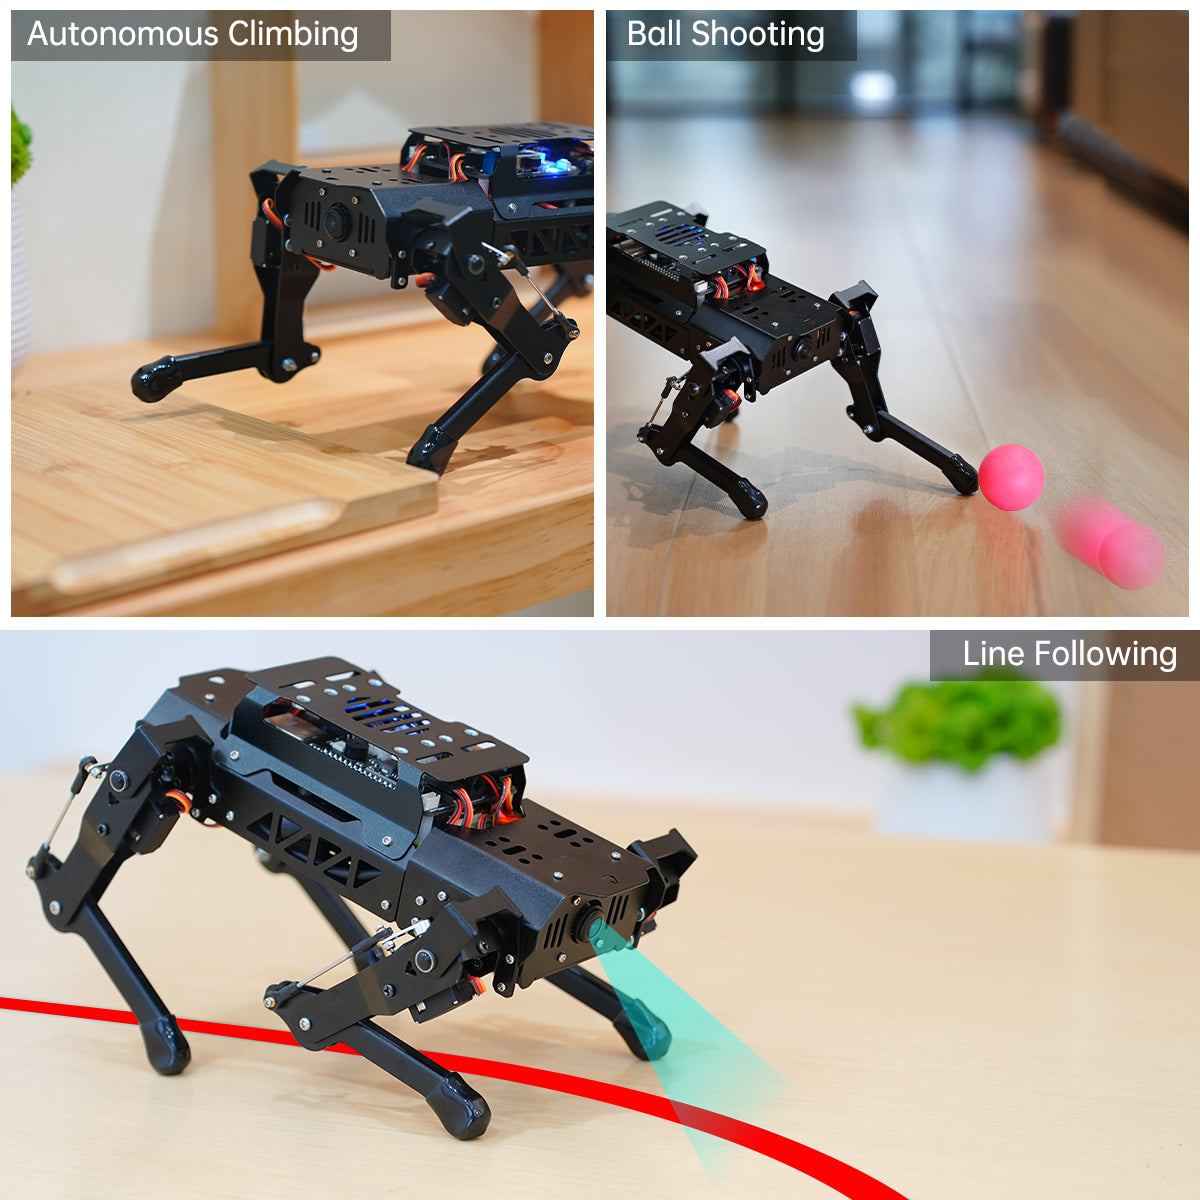 PuppyPi Hiwonder Quadruped Robot with AI Vision Powered by Raspberry Pi ROS Open Source Robot Dog